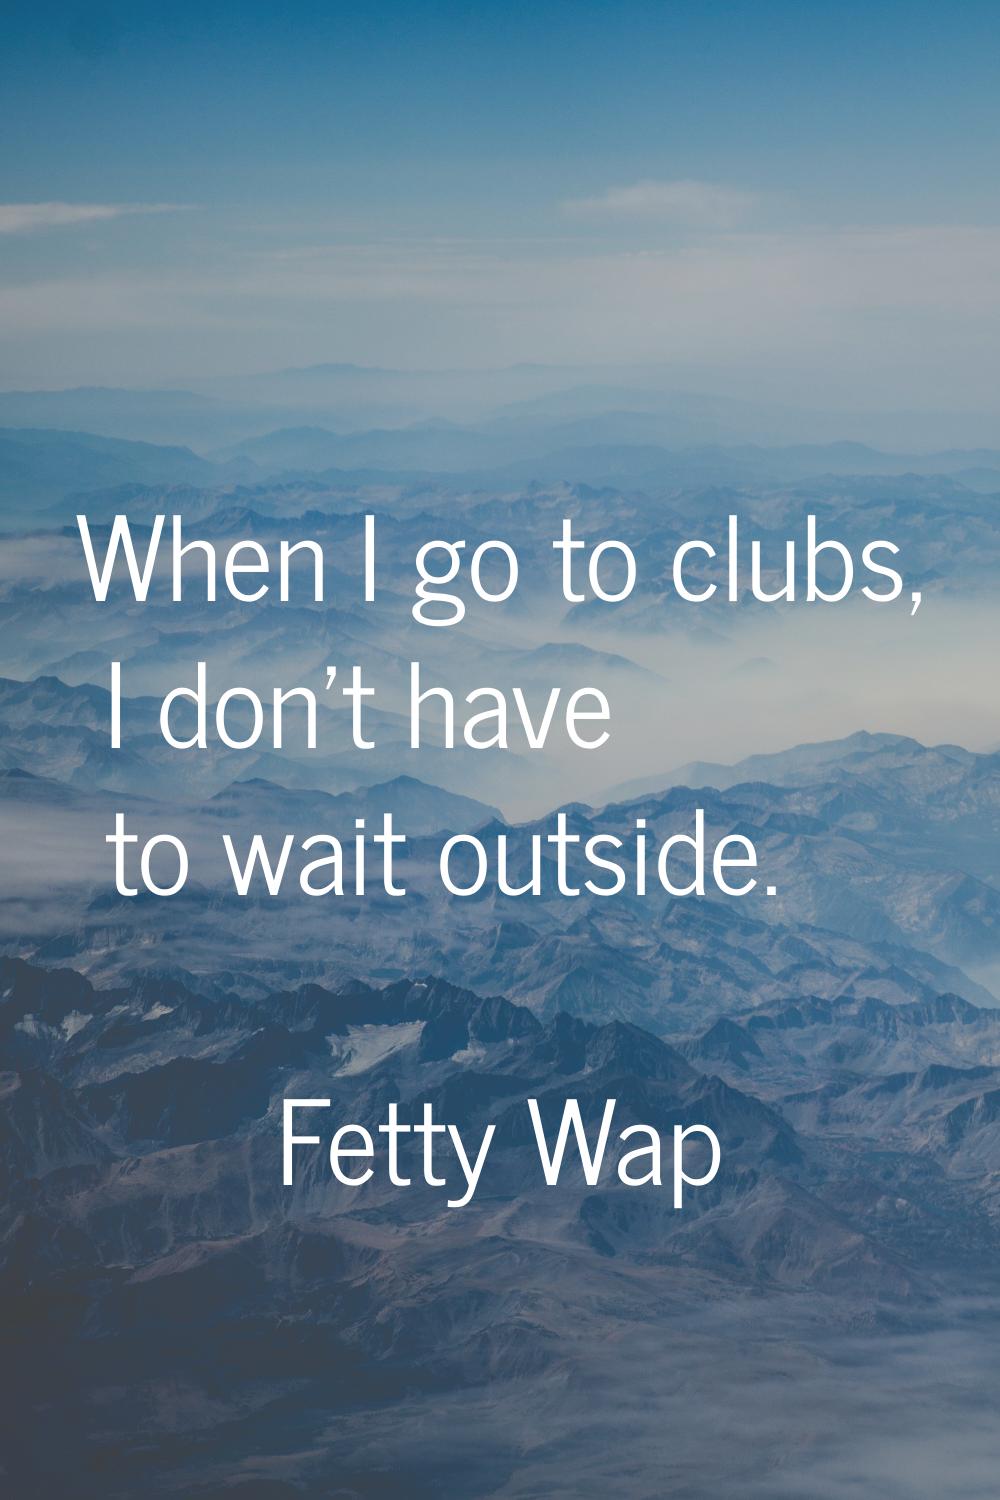 When I go to clubs, I don't have to wait outside.